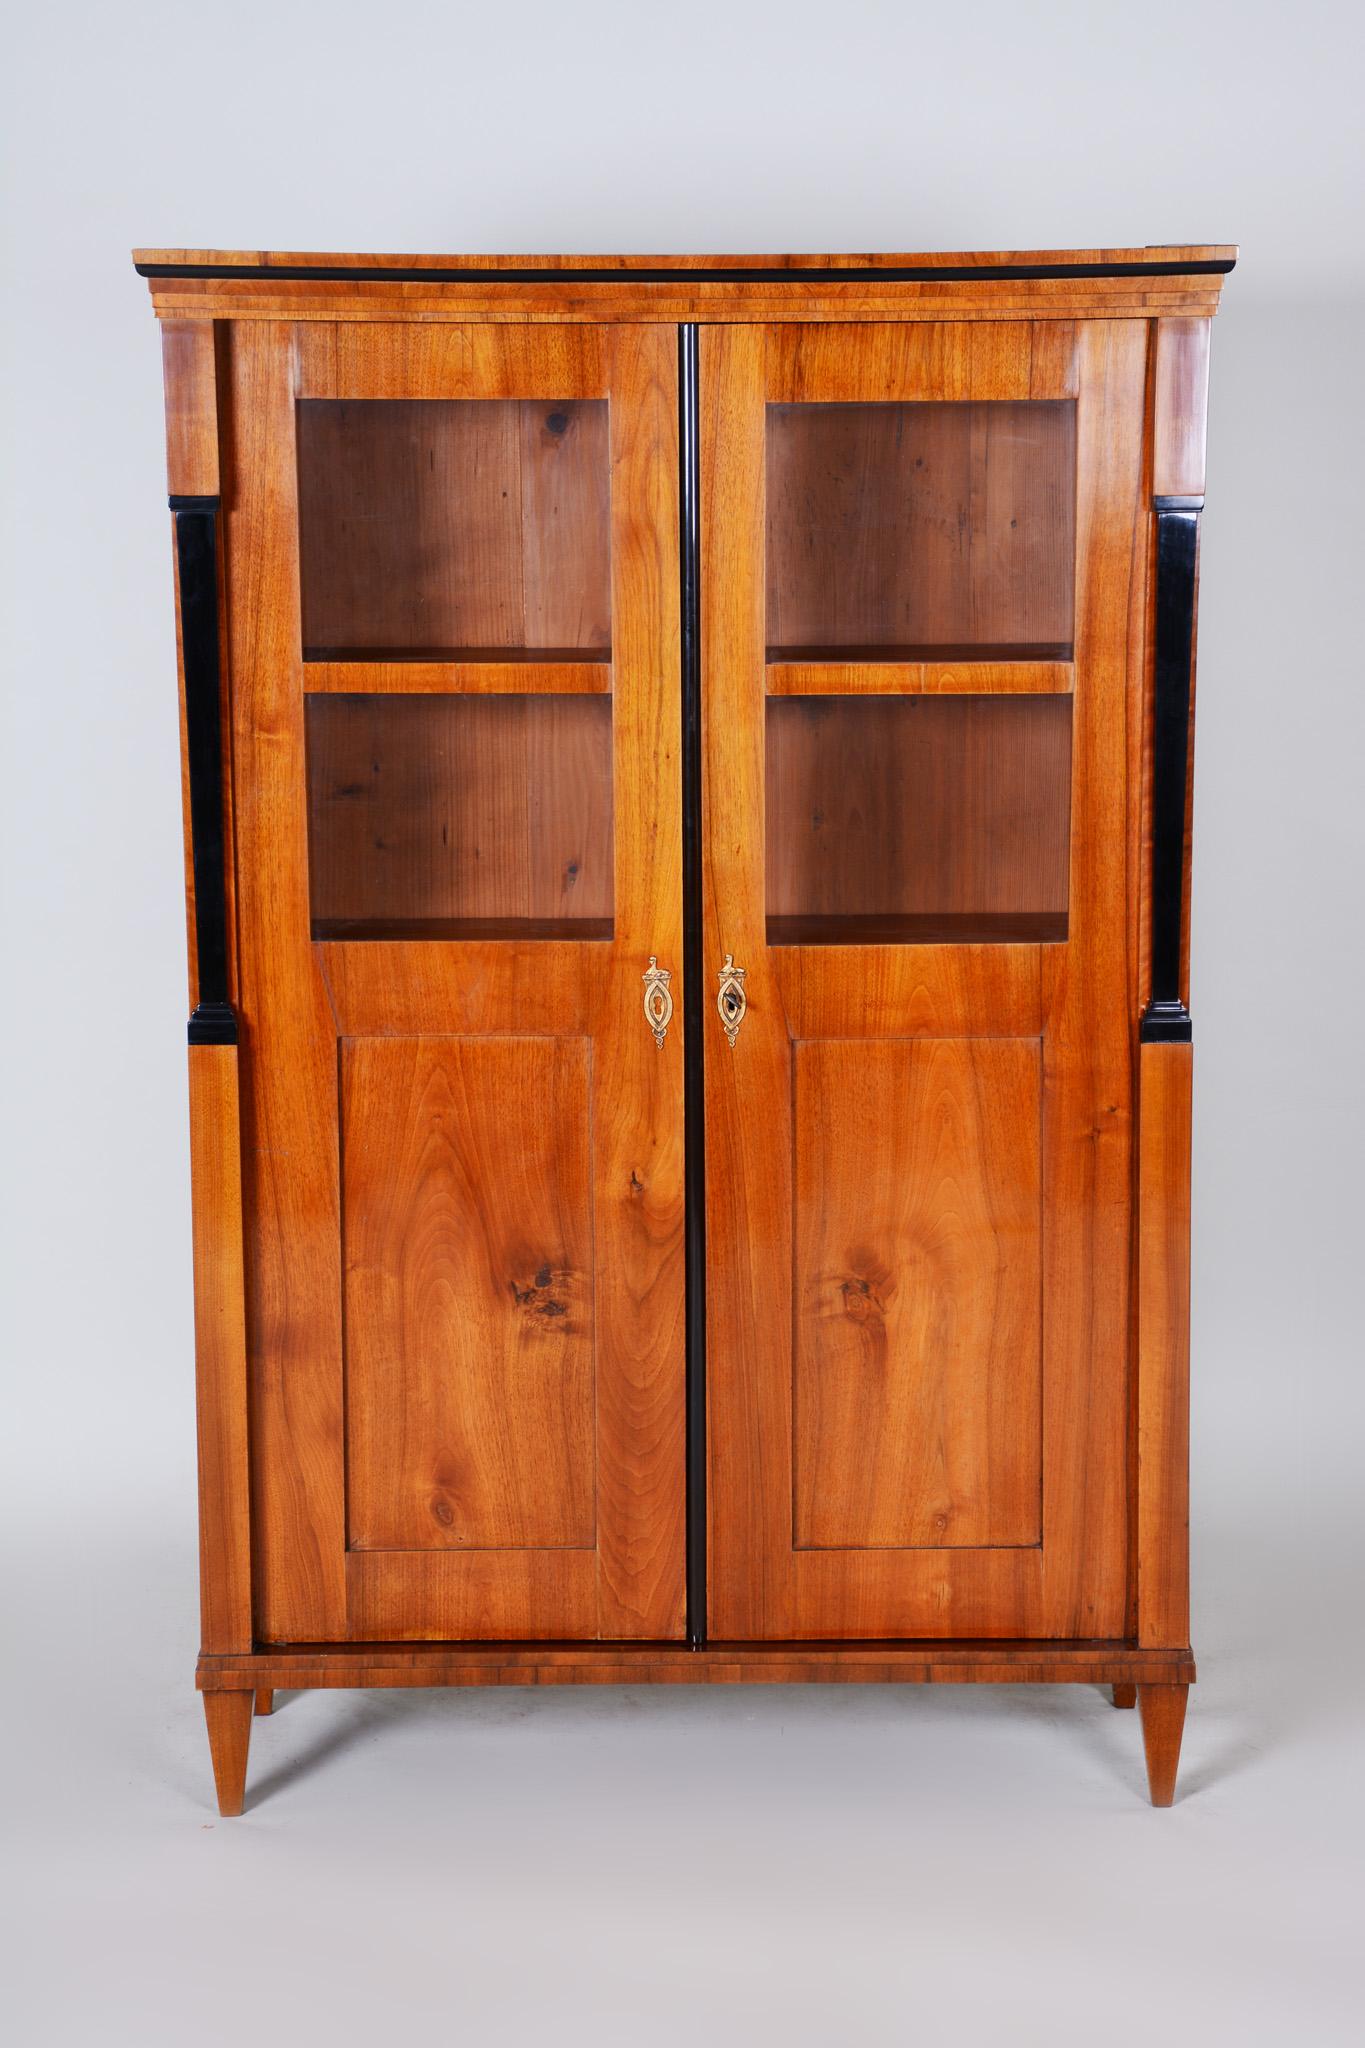 Shipping to any US port only for $290 USD

19th century Biedermeier double-door display bookcase
Completely restored to shellac polish.
Material: Walnut
Period: 1810 - 1819
Source: Austria - Vienna.

We guarantee safe a the cheapest air transport